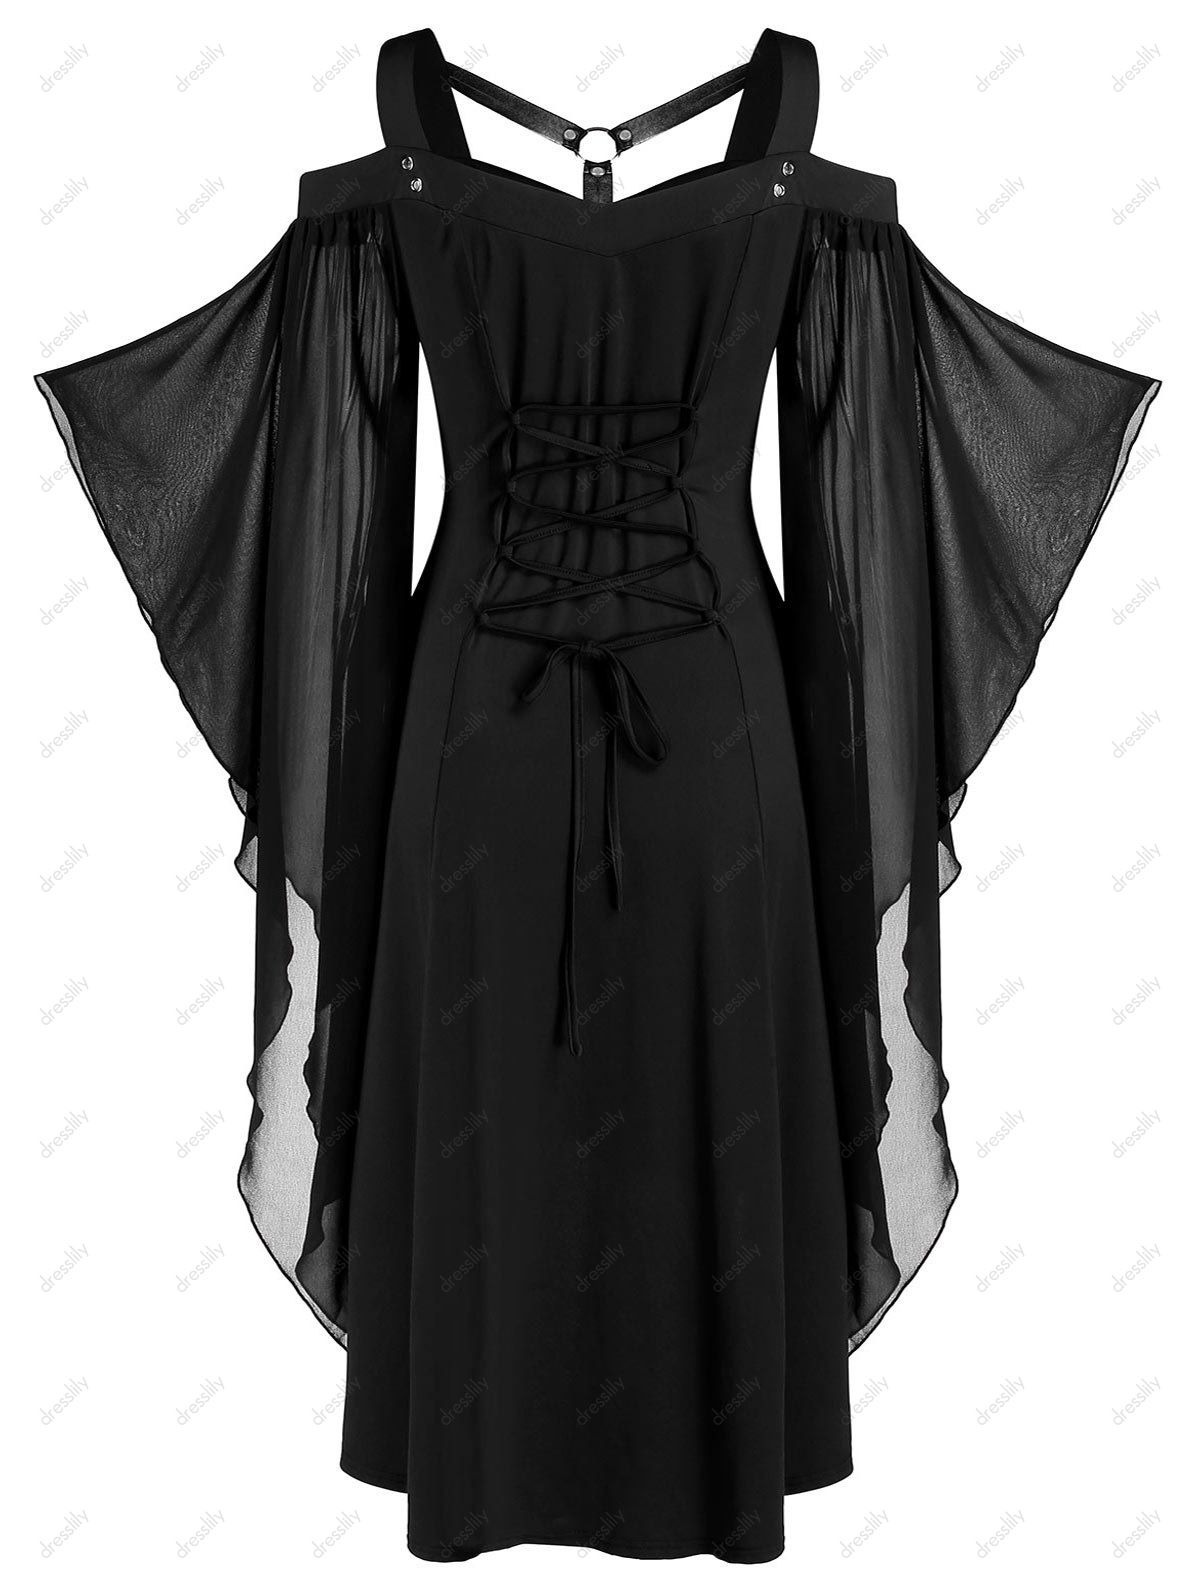 [46% OFF] 2020 Chiffon Batwing Sleeve Lace-up Harness Insert High Low ...